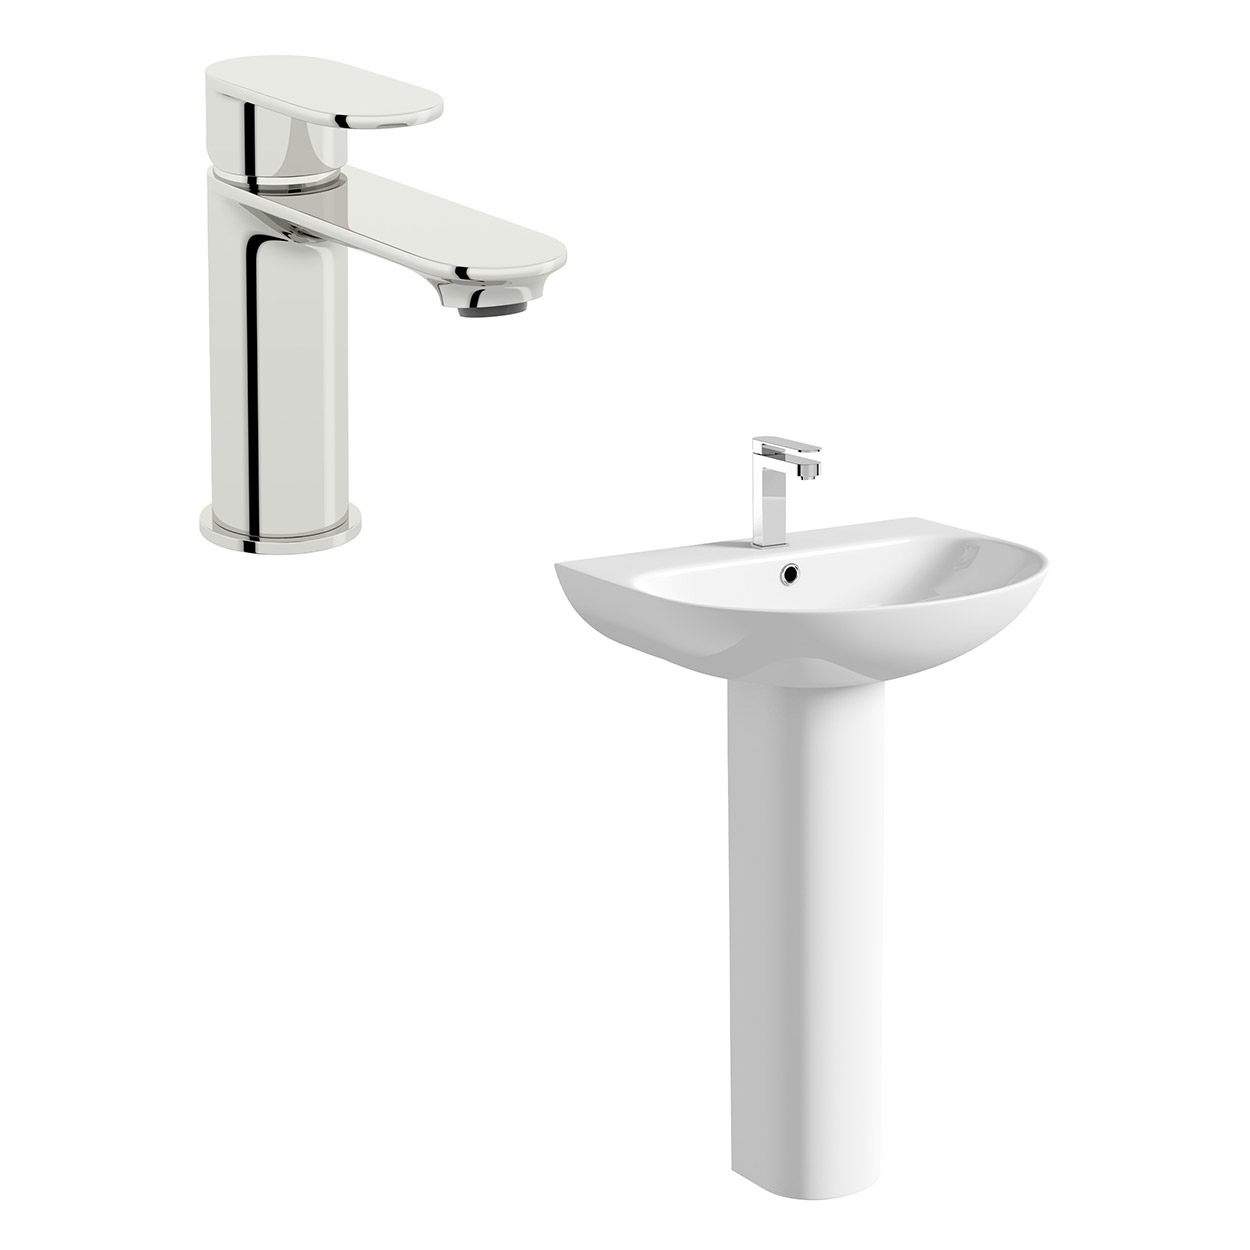 Mode Hardy 1 tap hole full pedestal basin 555mm with tap